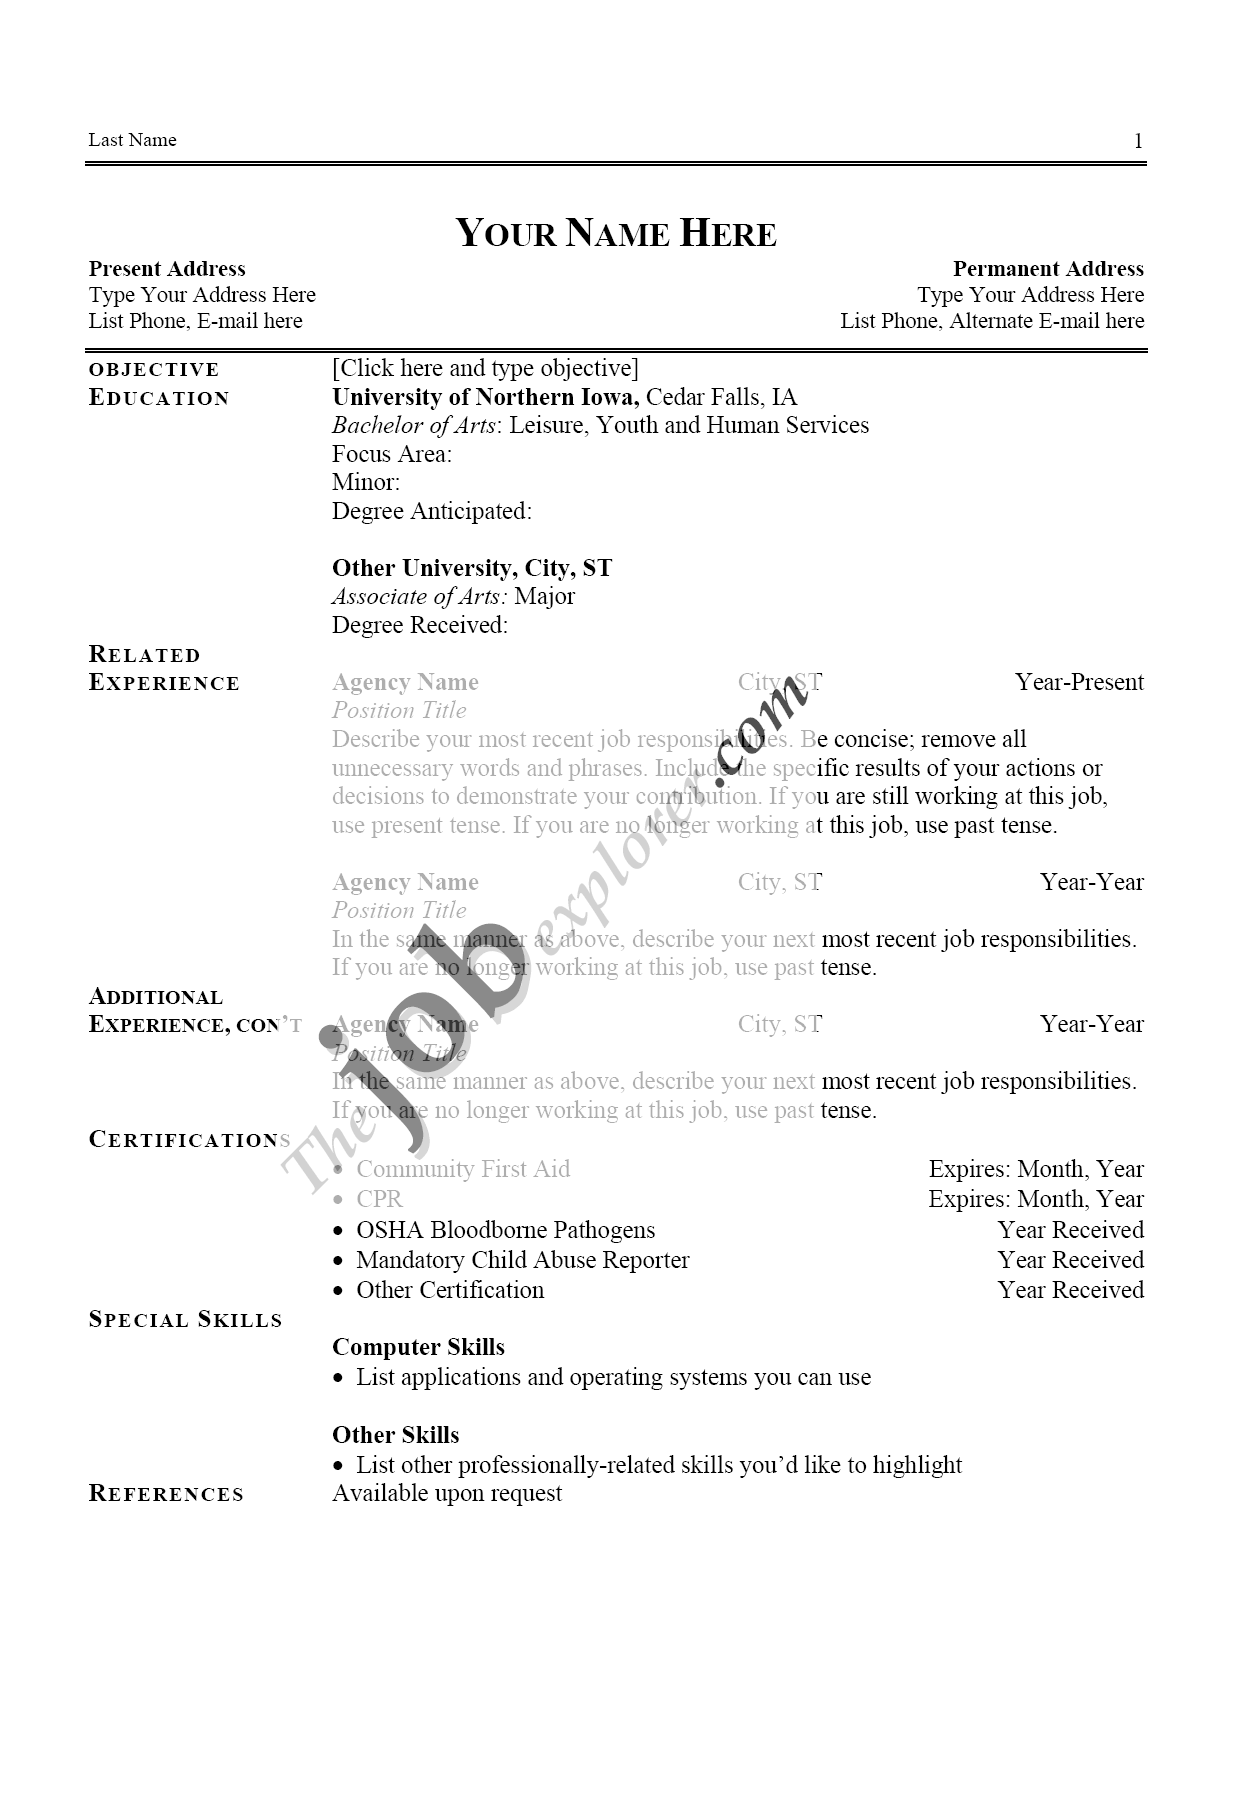 Cause and effect essay war c dc md resume